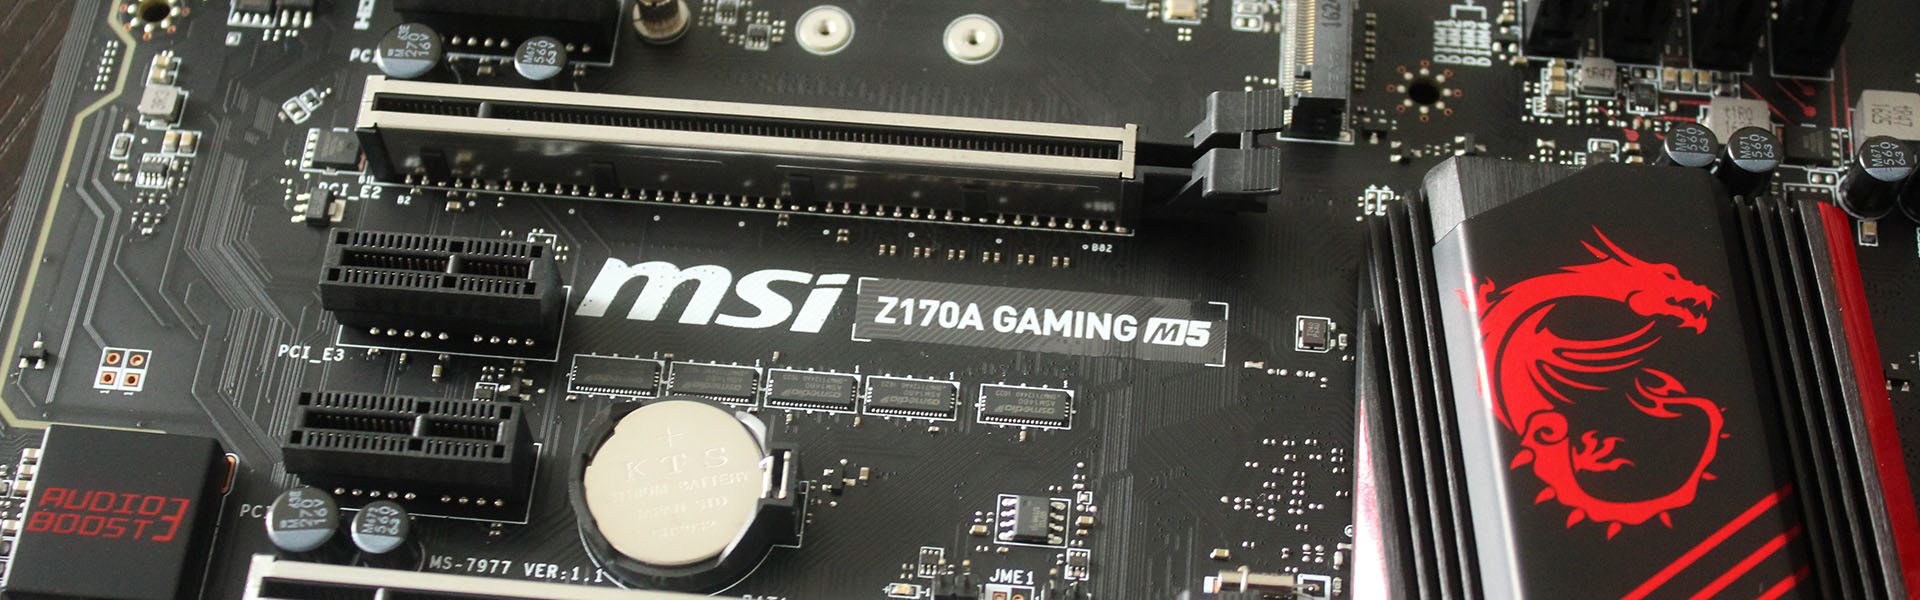 MSI Z170A Gaming M5 Motherboard Review 14